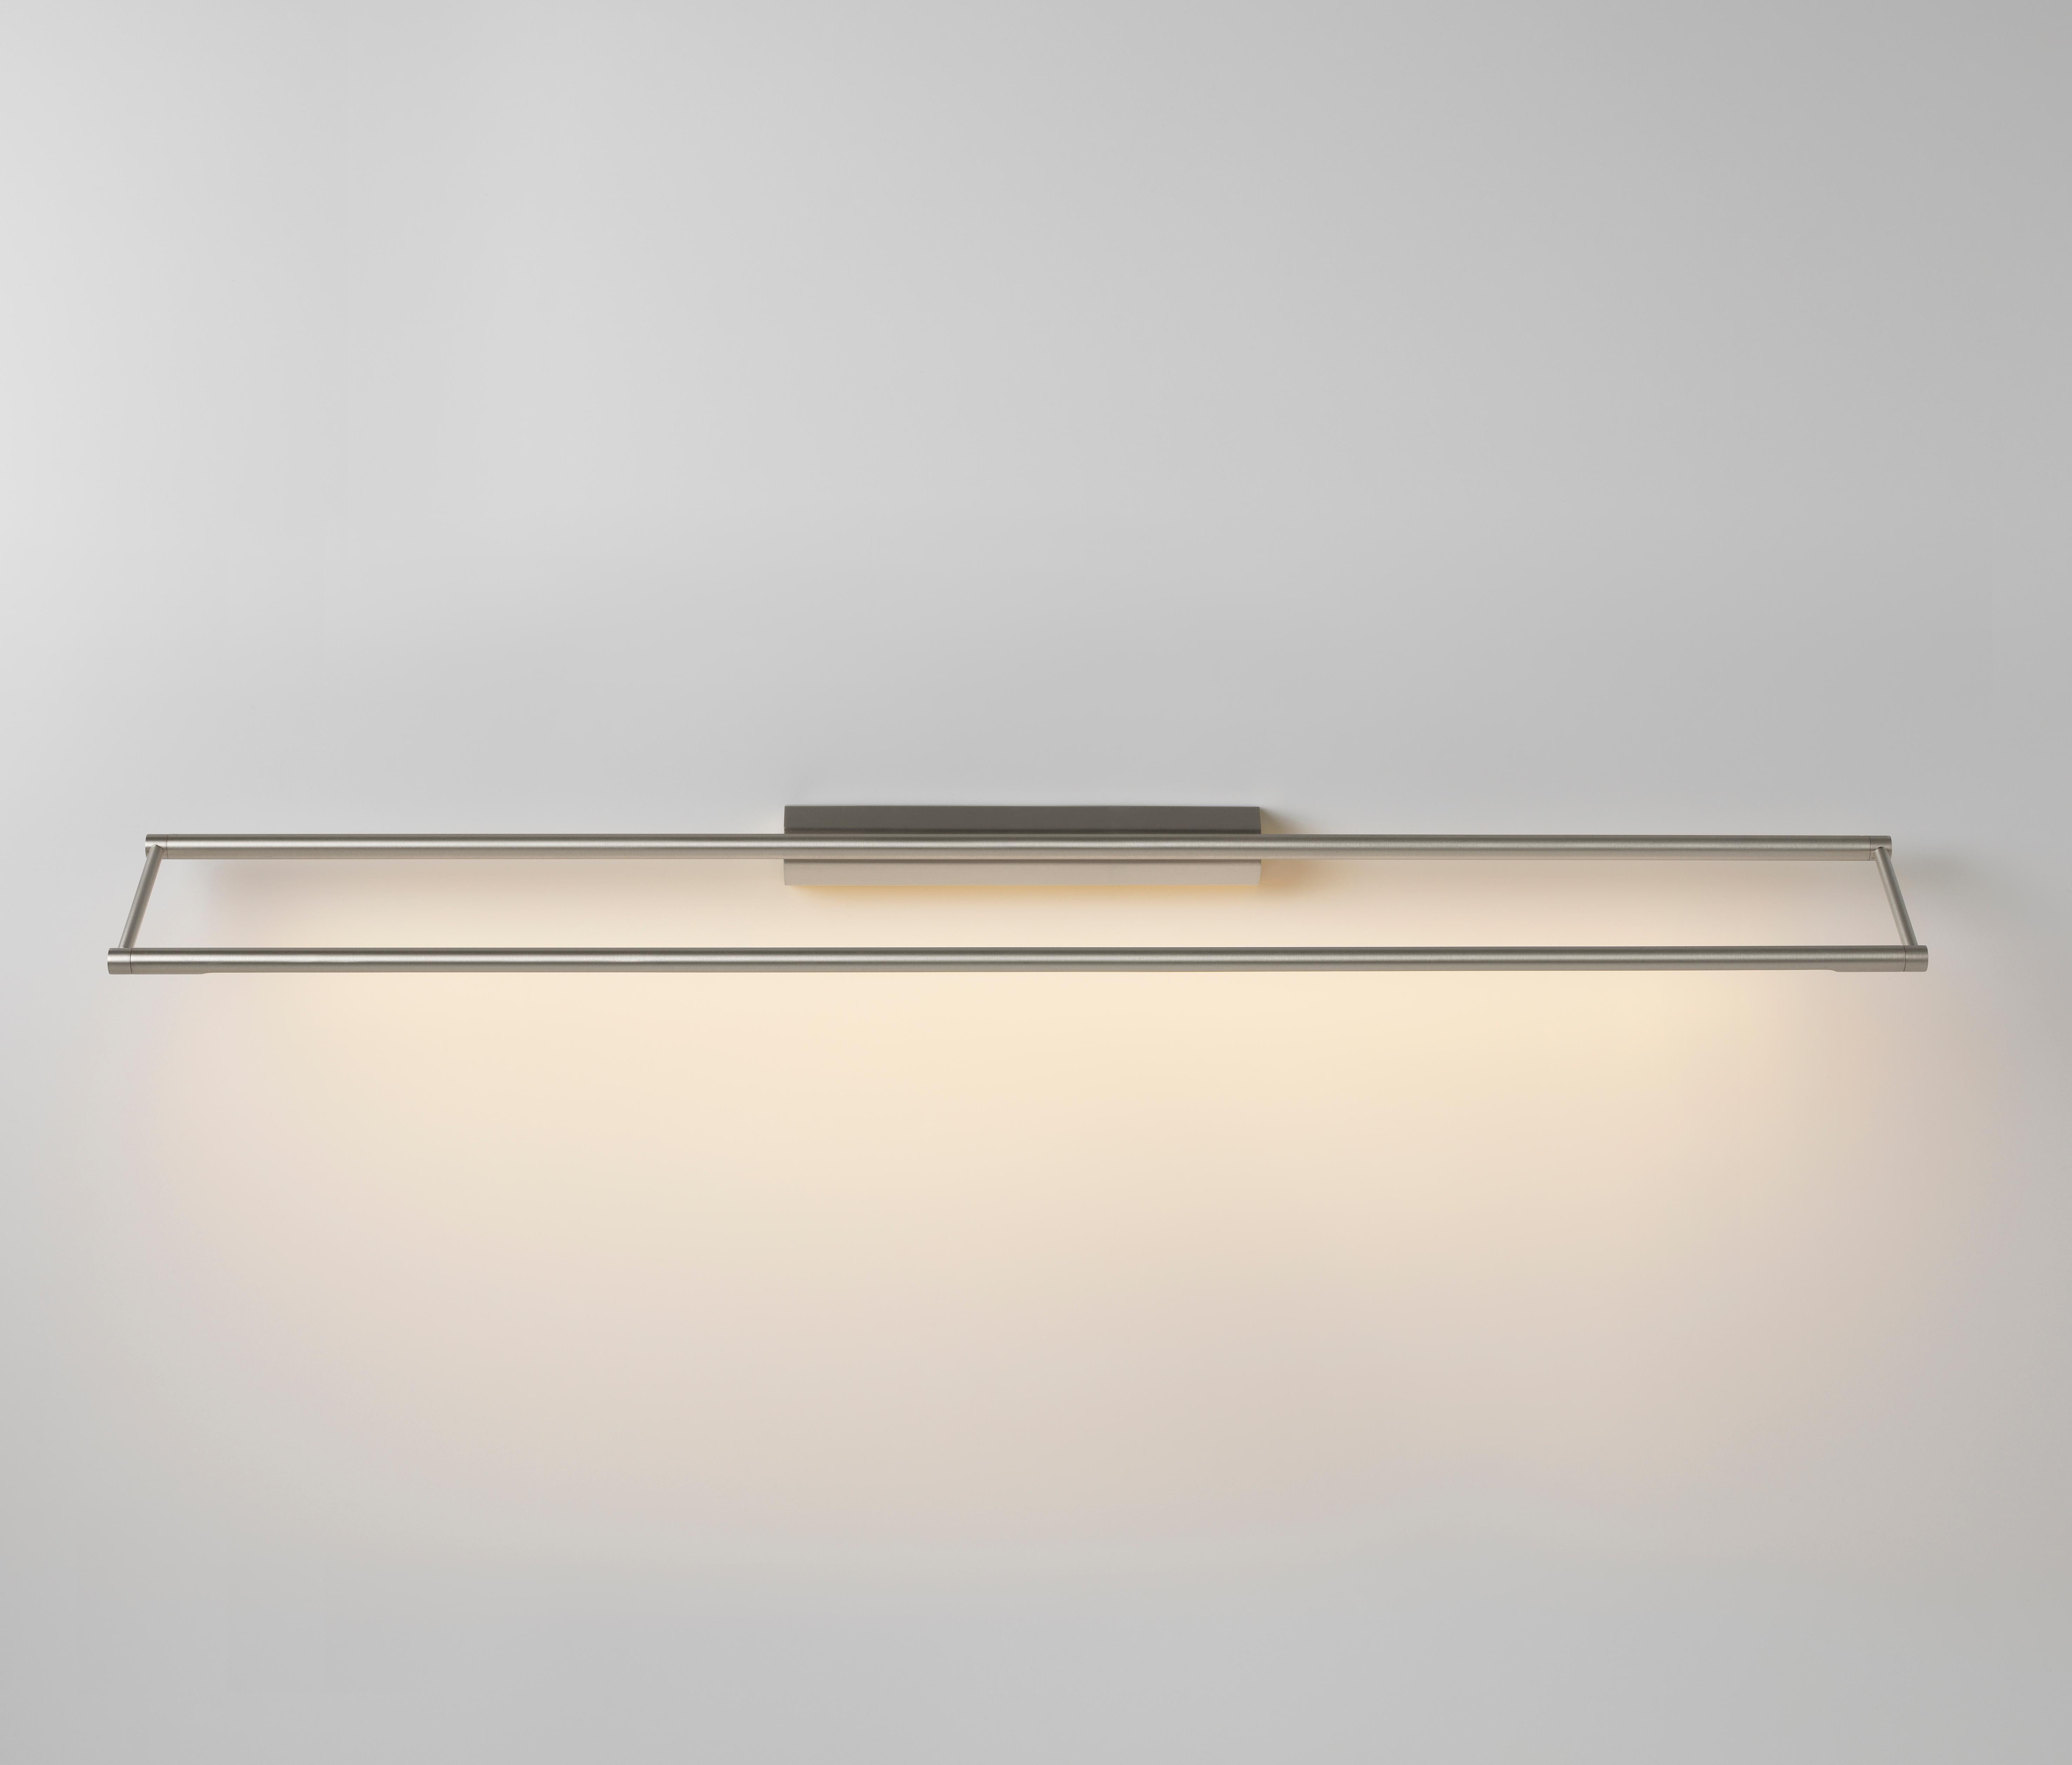 Link 985 Nickel wall light by Emilie Cathelineau
Dimensions: D 98.5 x W 11.5 x H 4.4 cm
Materials: Solid brass, Satin polycarbonate diffuser, black textile cable (2m)
Others finishes and dimensions are available.

All our lamps can be wired